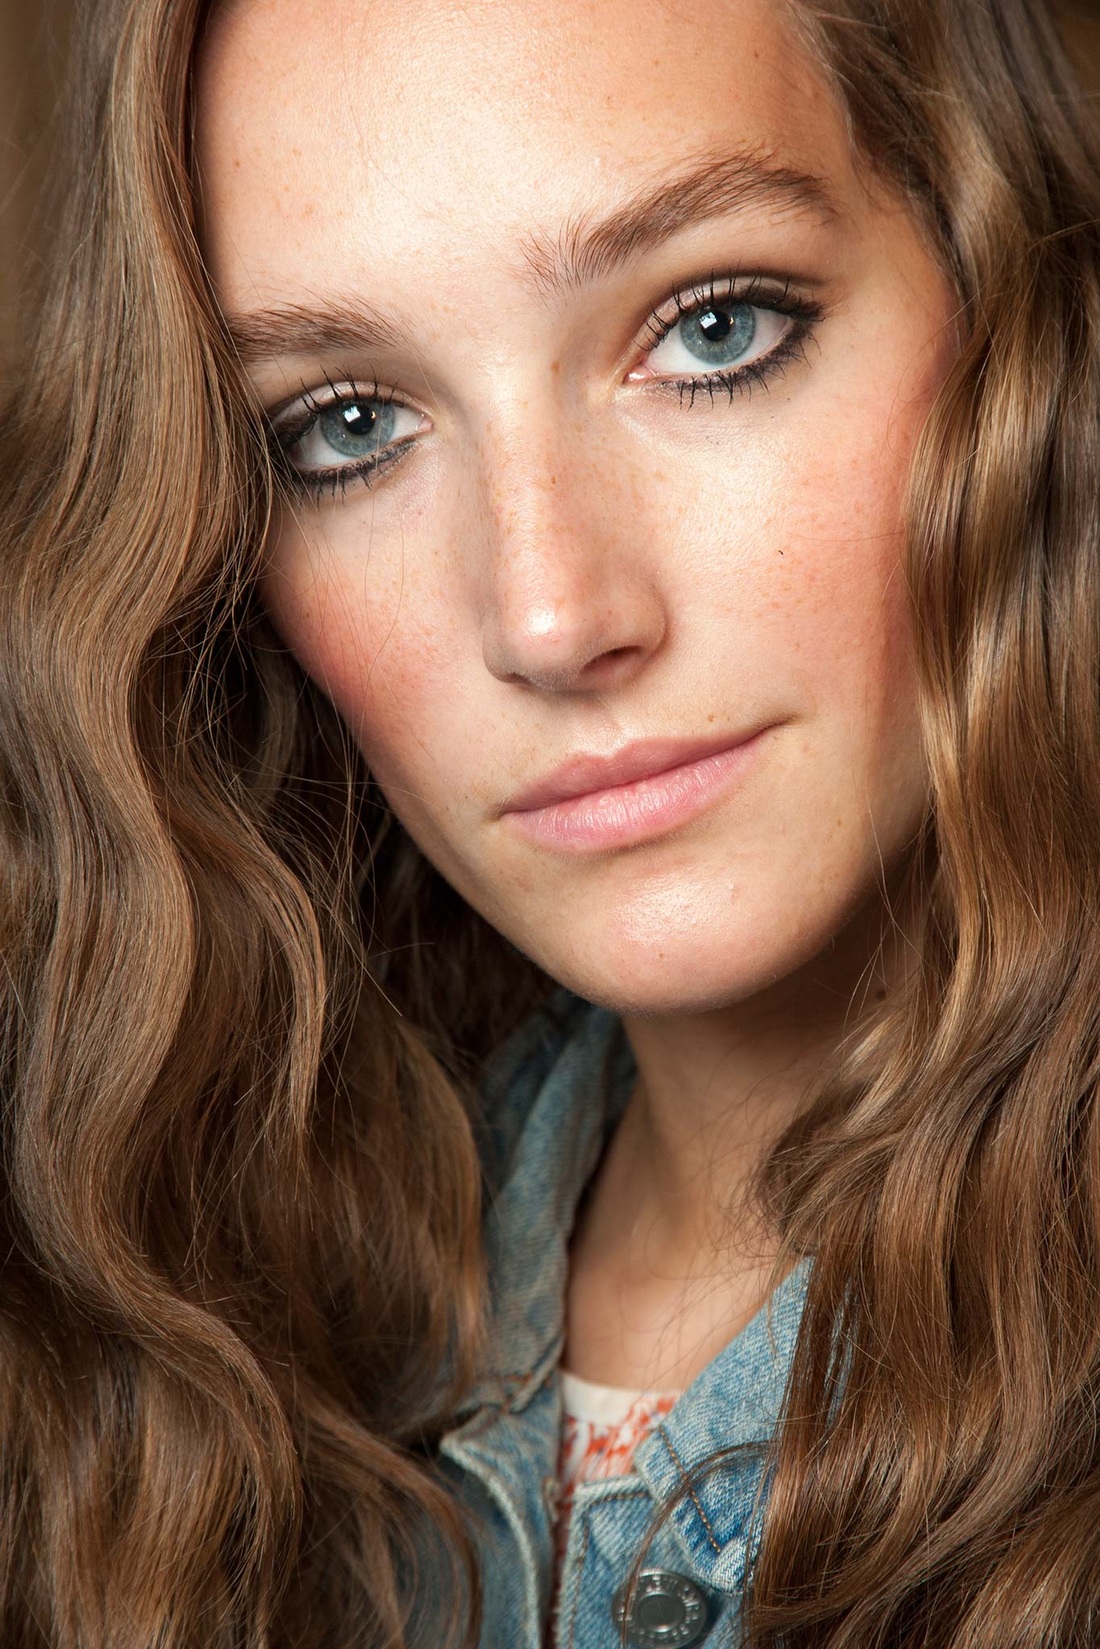 7 Spring 2015 Beauty Trends To Try - LIBRA VEINS